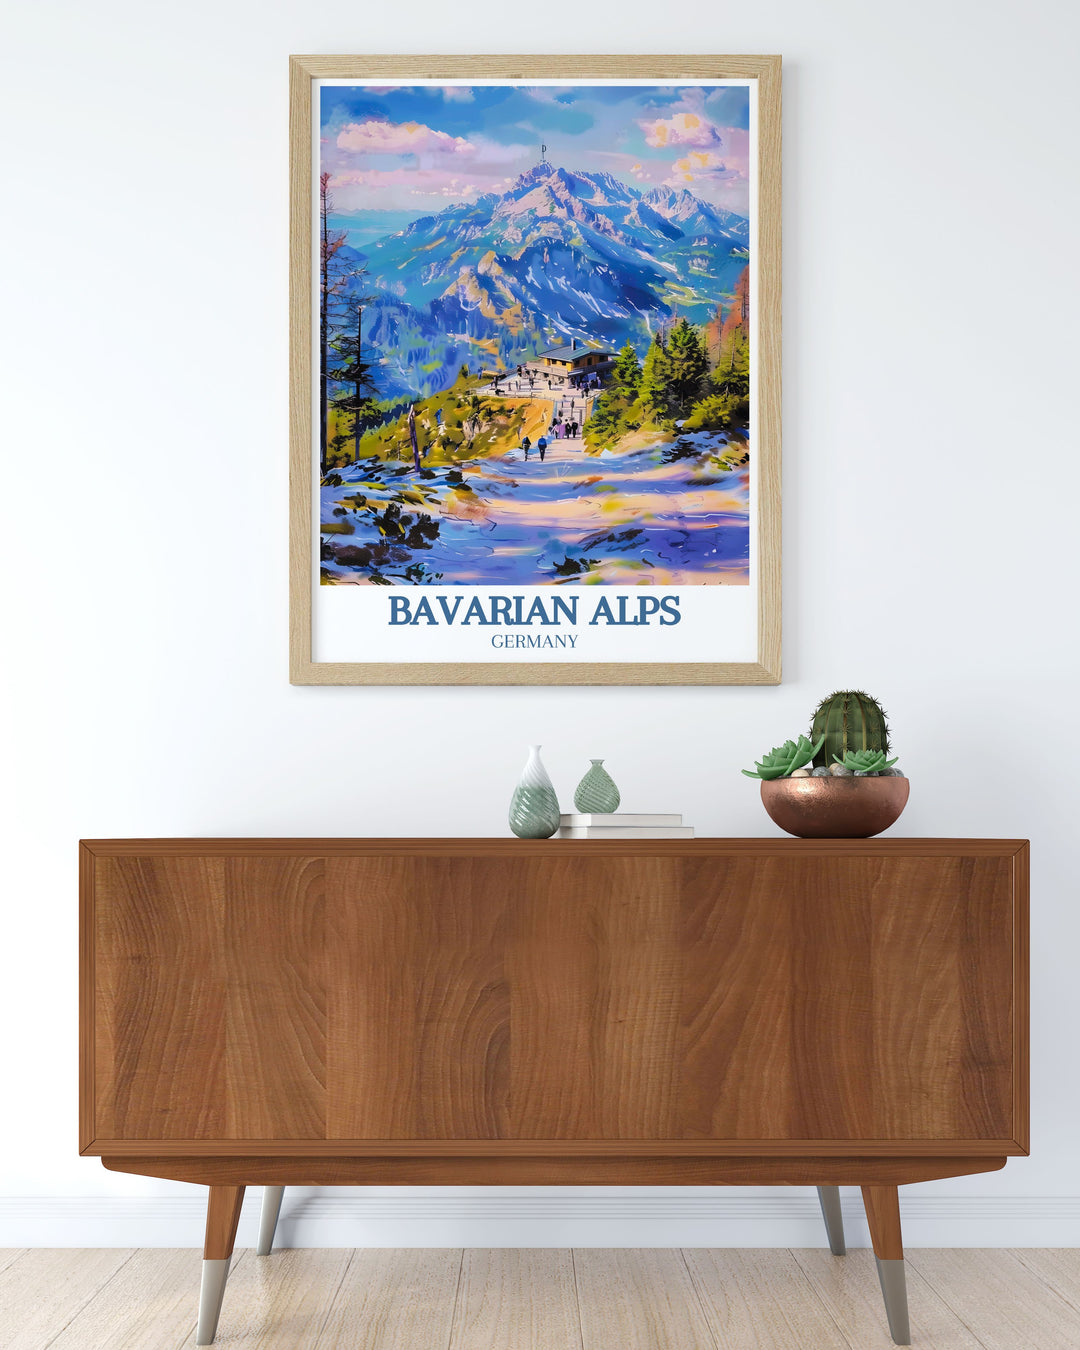 Elegant Germany wall art featuring the Bavarian Alps, Berchtesgaden National Park, and the historic Eagles Nest, highlighting the regions natural and cultural beauty. Perfect for adding sophistication and adventure to any room.